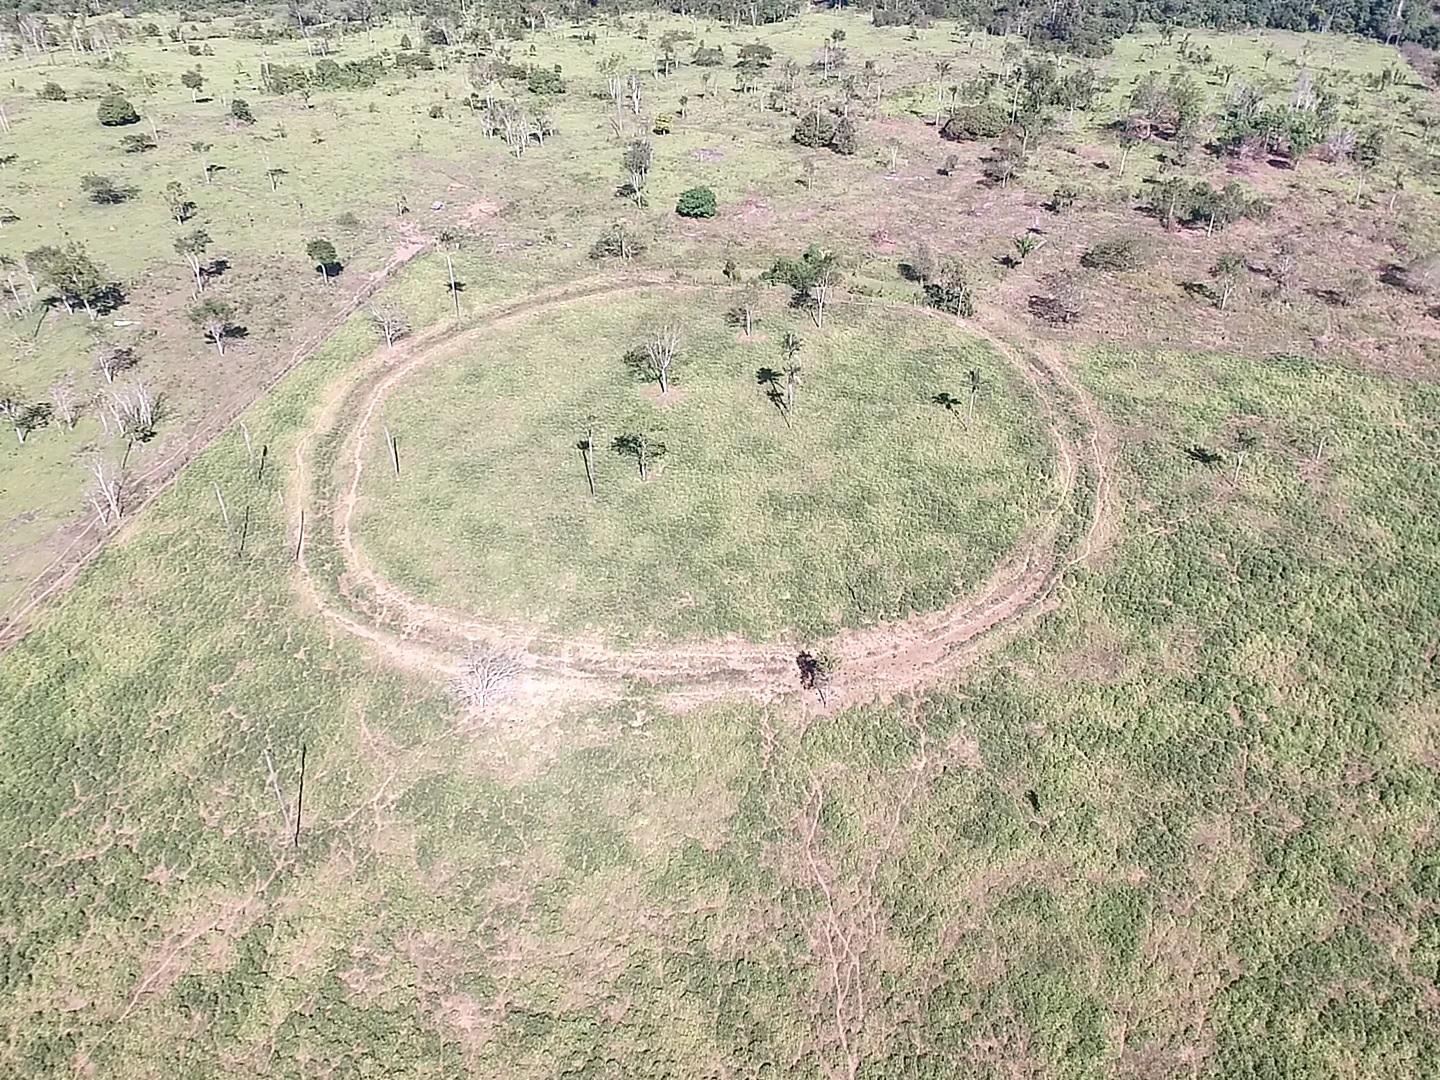 Aerial photo of archaeological site Mt05, a circular enclosure located in the Amazon rainforest containing evidence of pre-Columbian societies living there